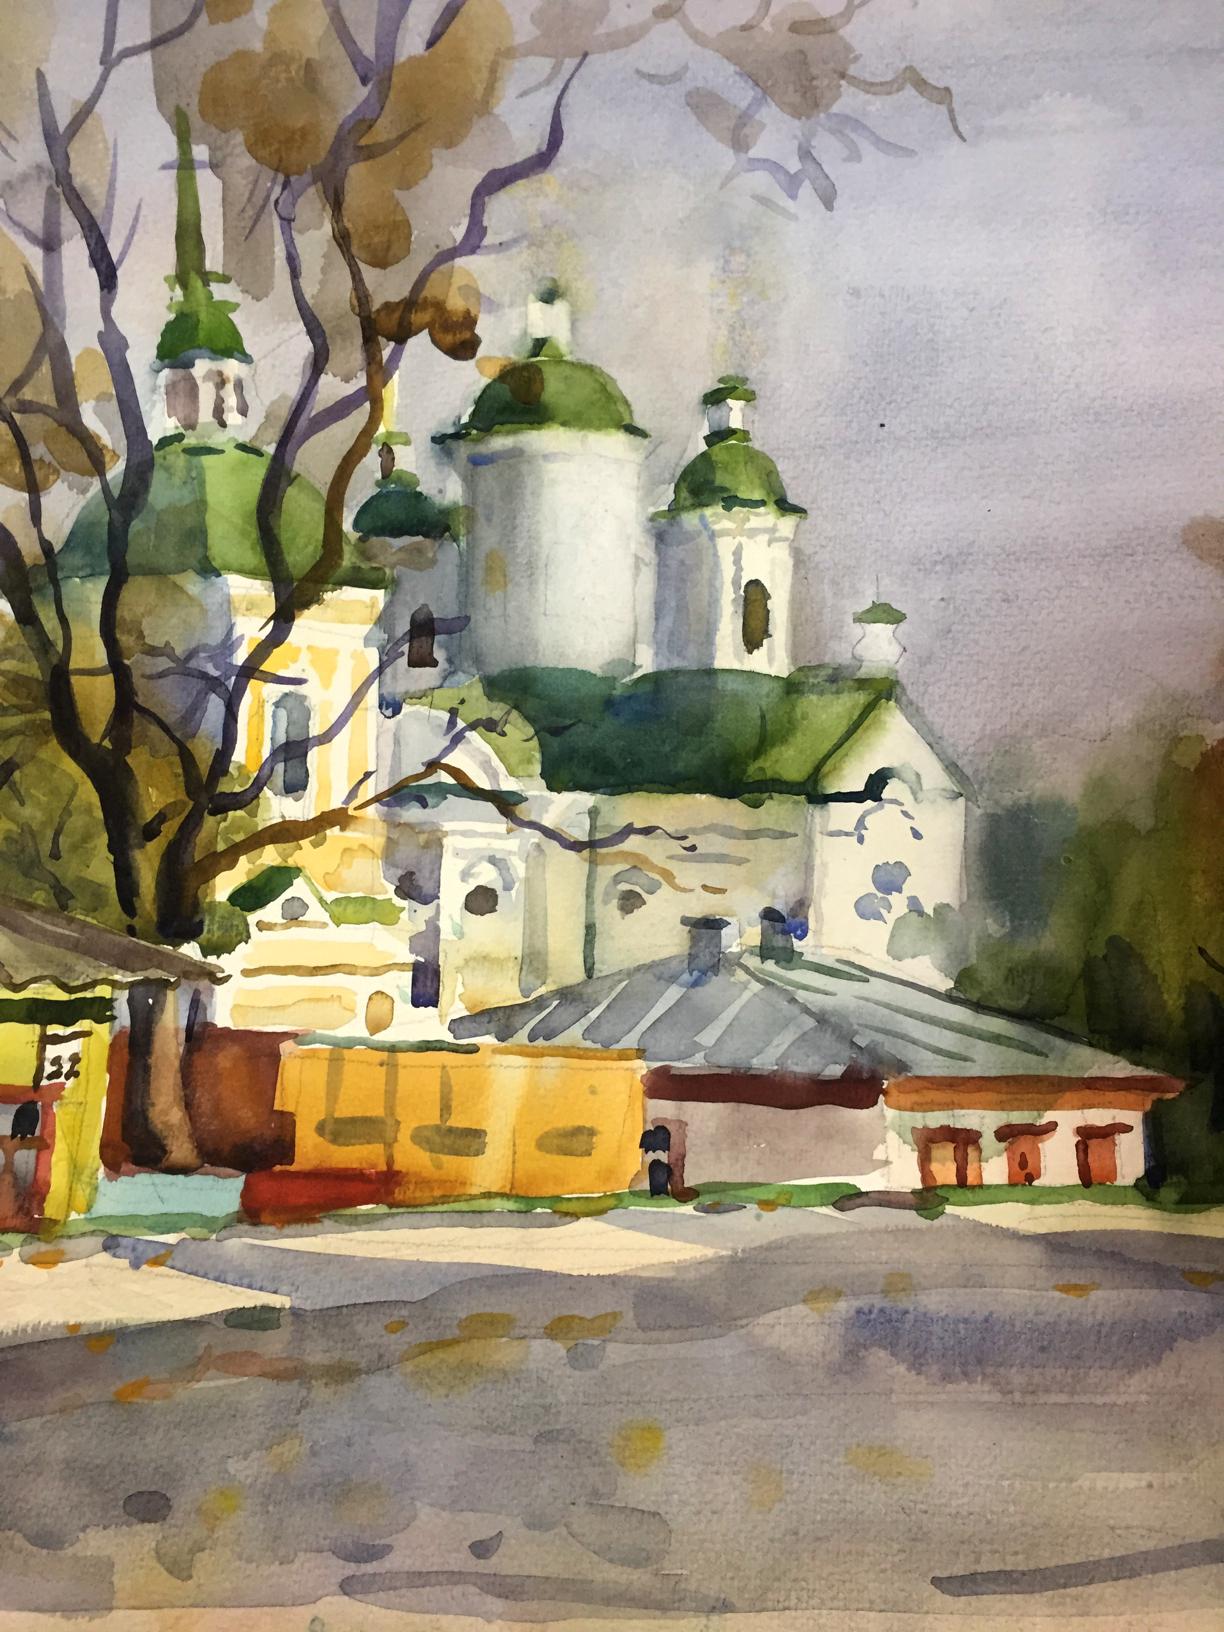 Watercolor painting City center and with church Viktor Kryzhanivskyi